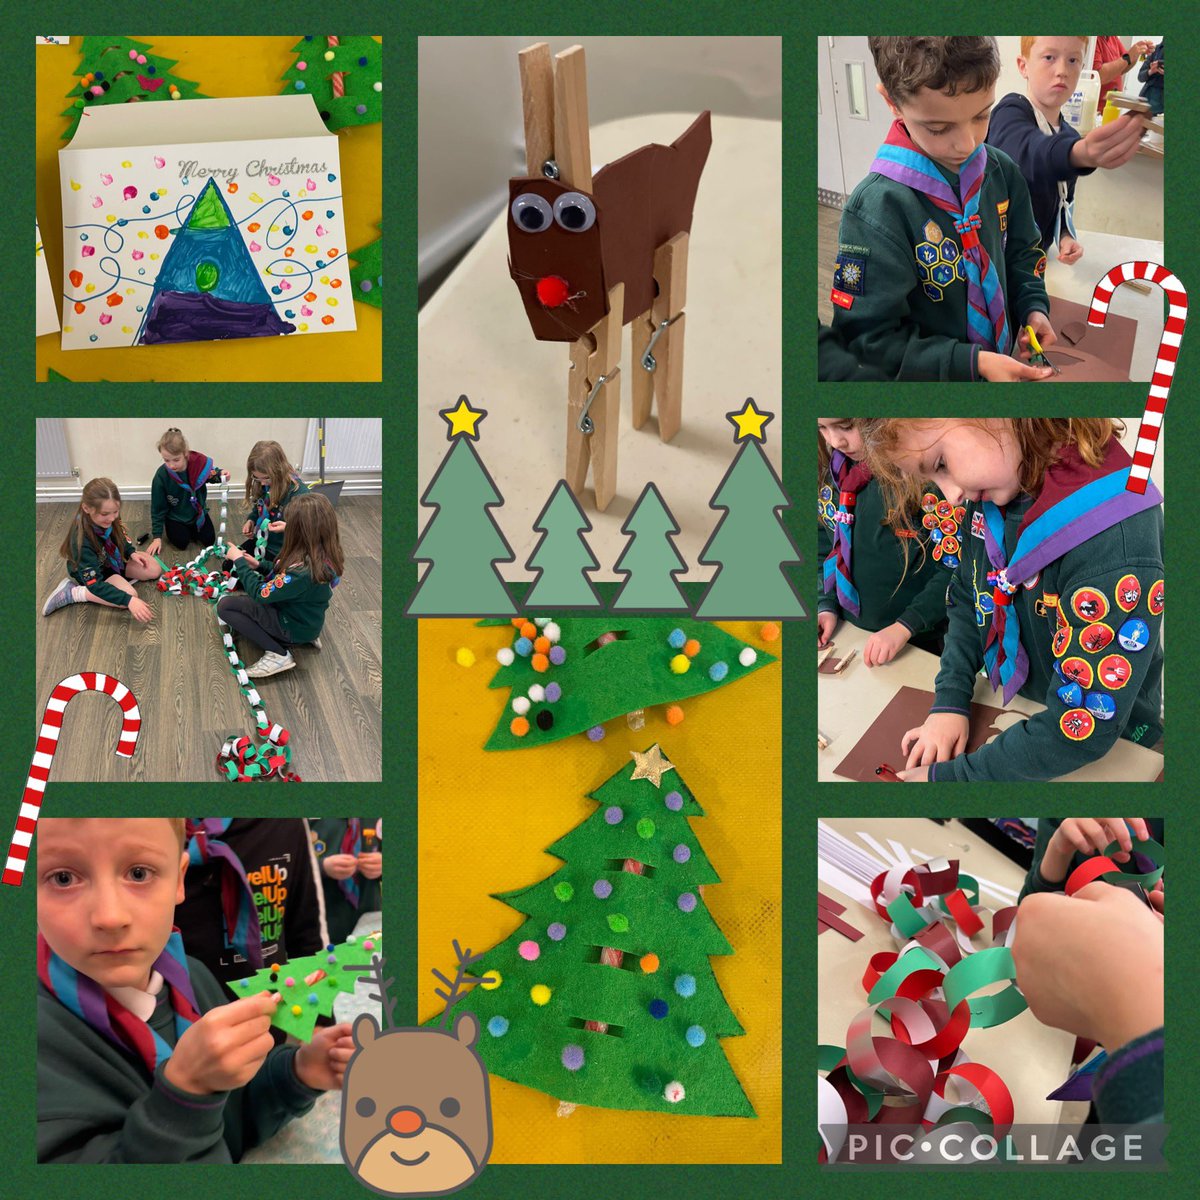 Our #Beavers & #Cubs helped to spread some #kindness at last weeks sessions!
They made some beautiful decorations, cards and gifts to be used at a community Christmas party this weekend at our meeting place @ManorfieldHall 🙂

#skillsforlife #Christmas2023 #crafts #community